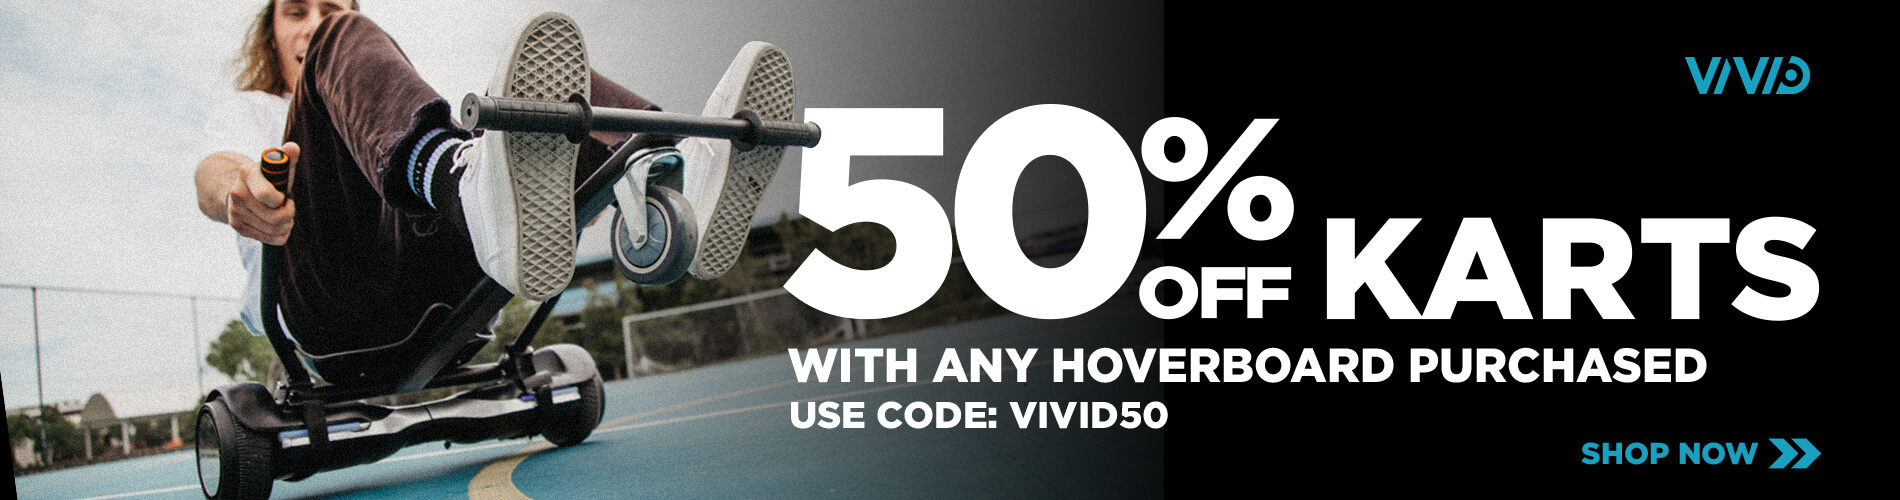 Scooter Hut extra 50% OFF on karts with any Hoverboard purchased with coupon code